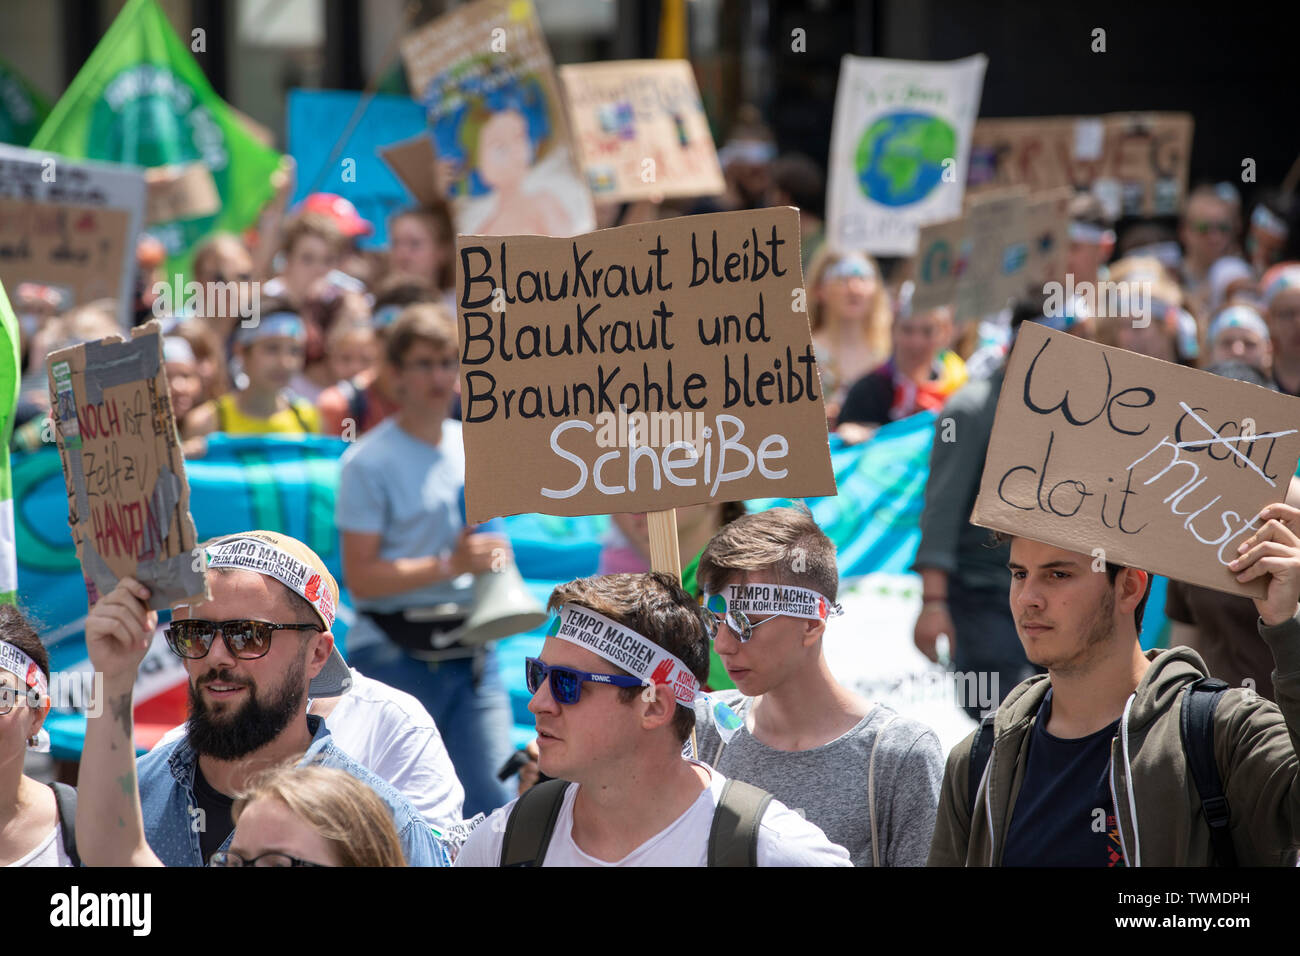 First international climate protection demonstration, climate strike, the movement Fridays for Future, in Aachen, with tens of thousands of participan Stock Photo